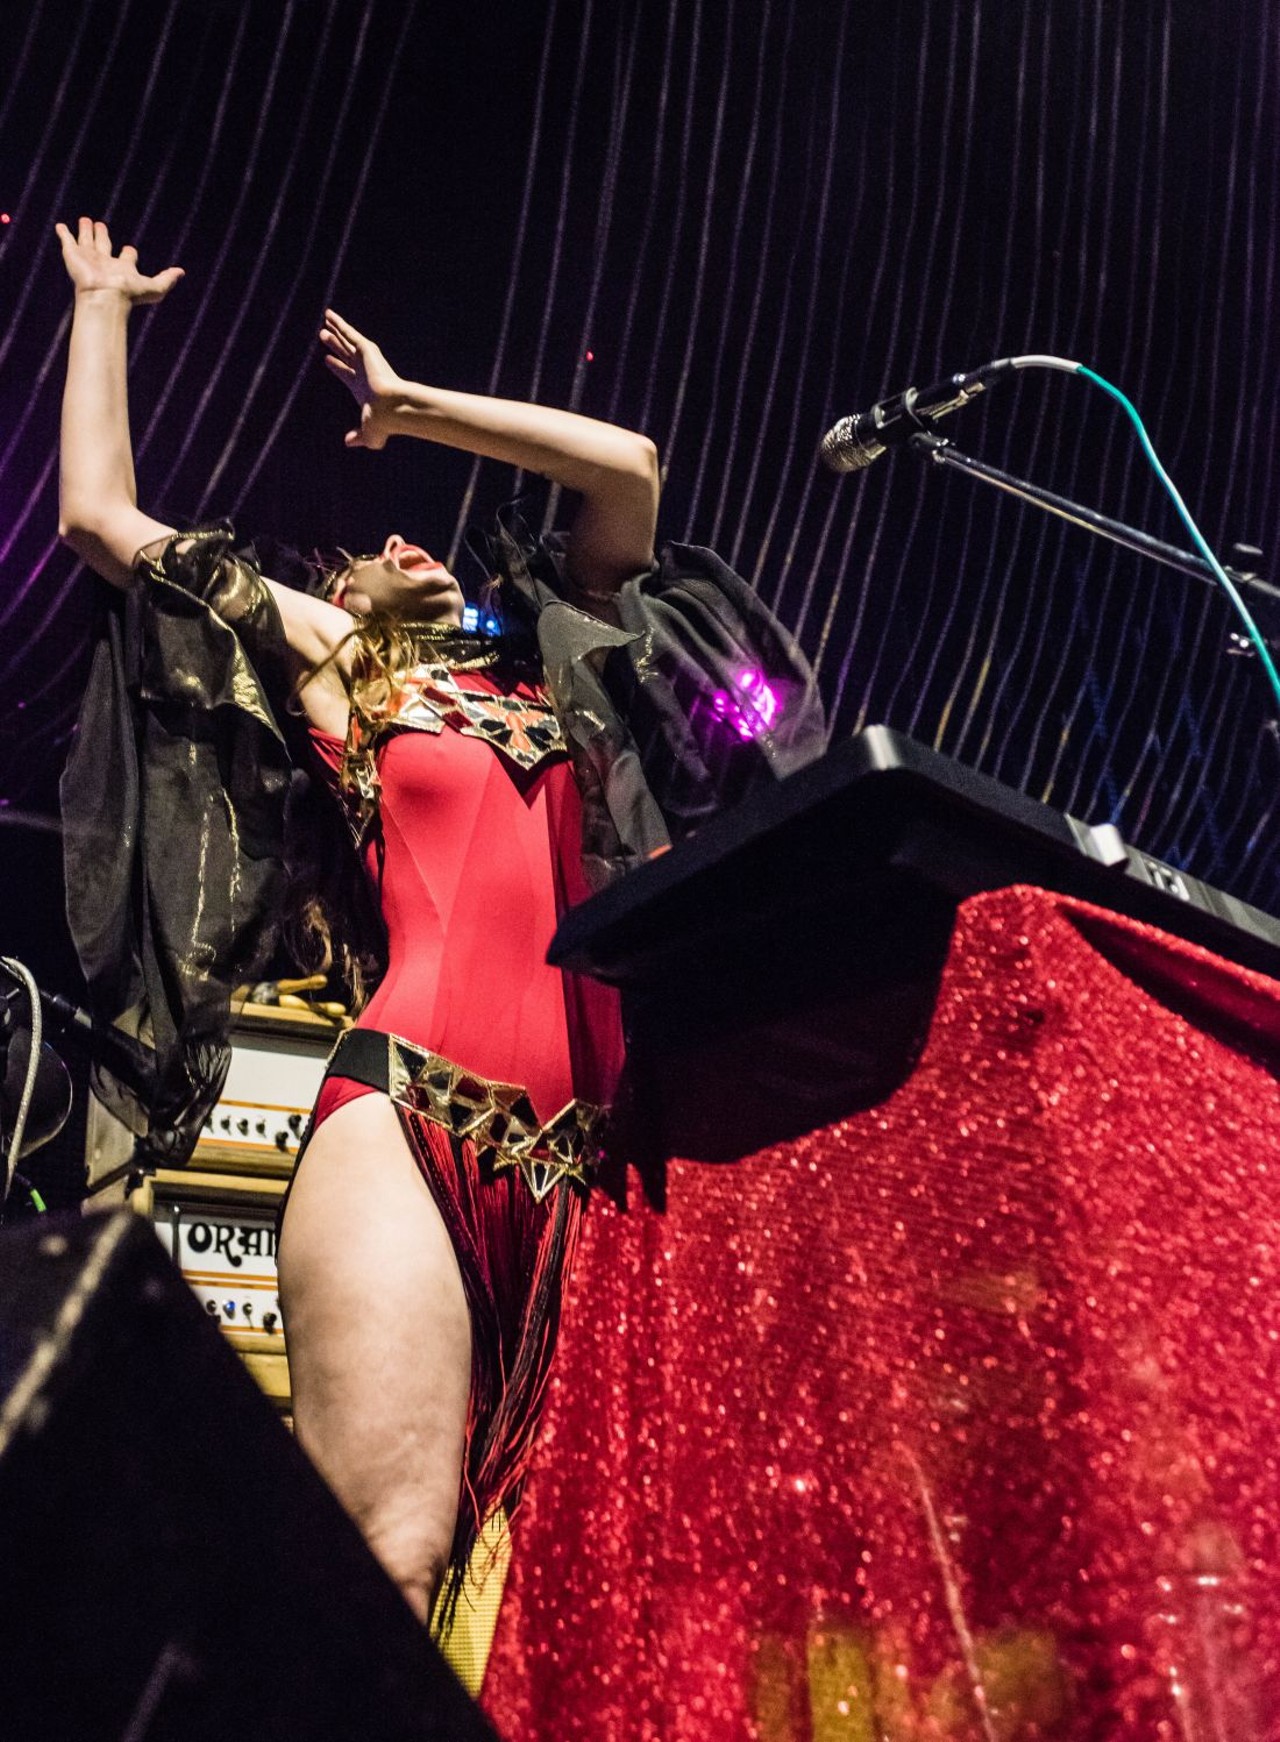 The Flaming Lips and Le Butcherettes Playing at the Agora